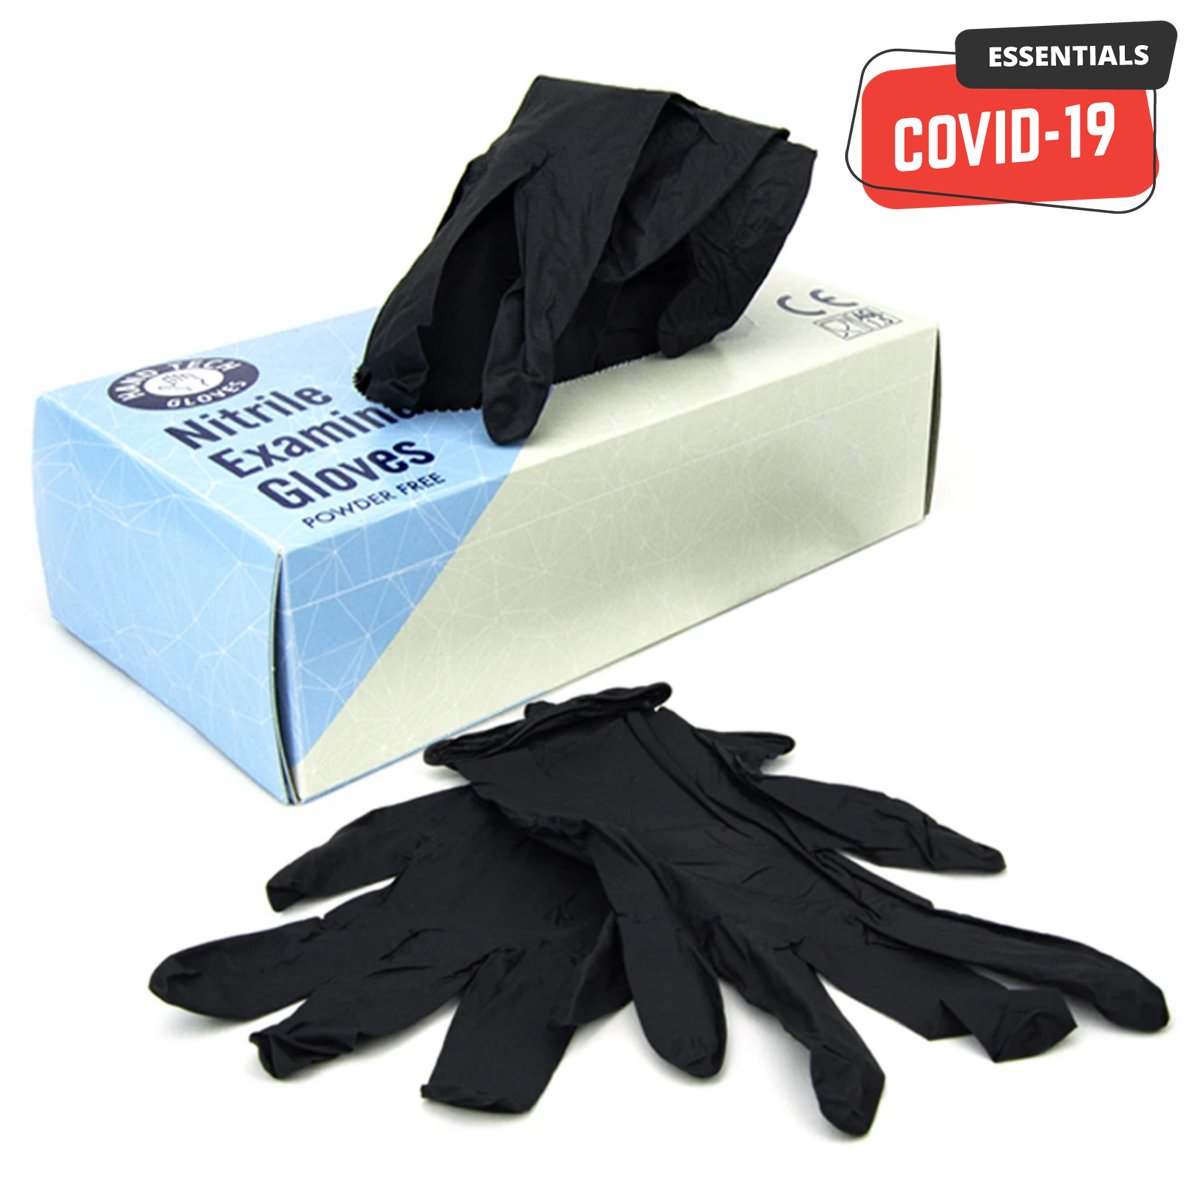 HAND TECH | Powder-Free Disposable Gloves | Black - Nitrile - 100 Count - 1